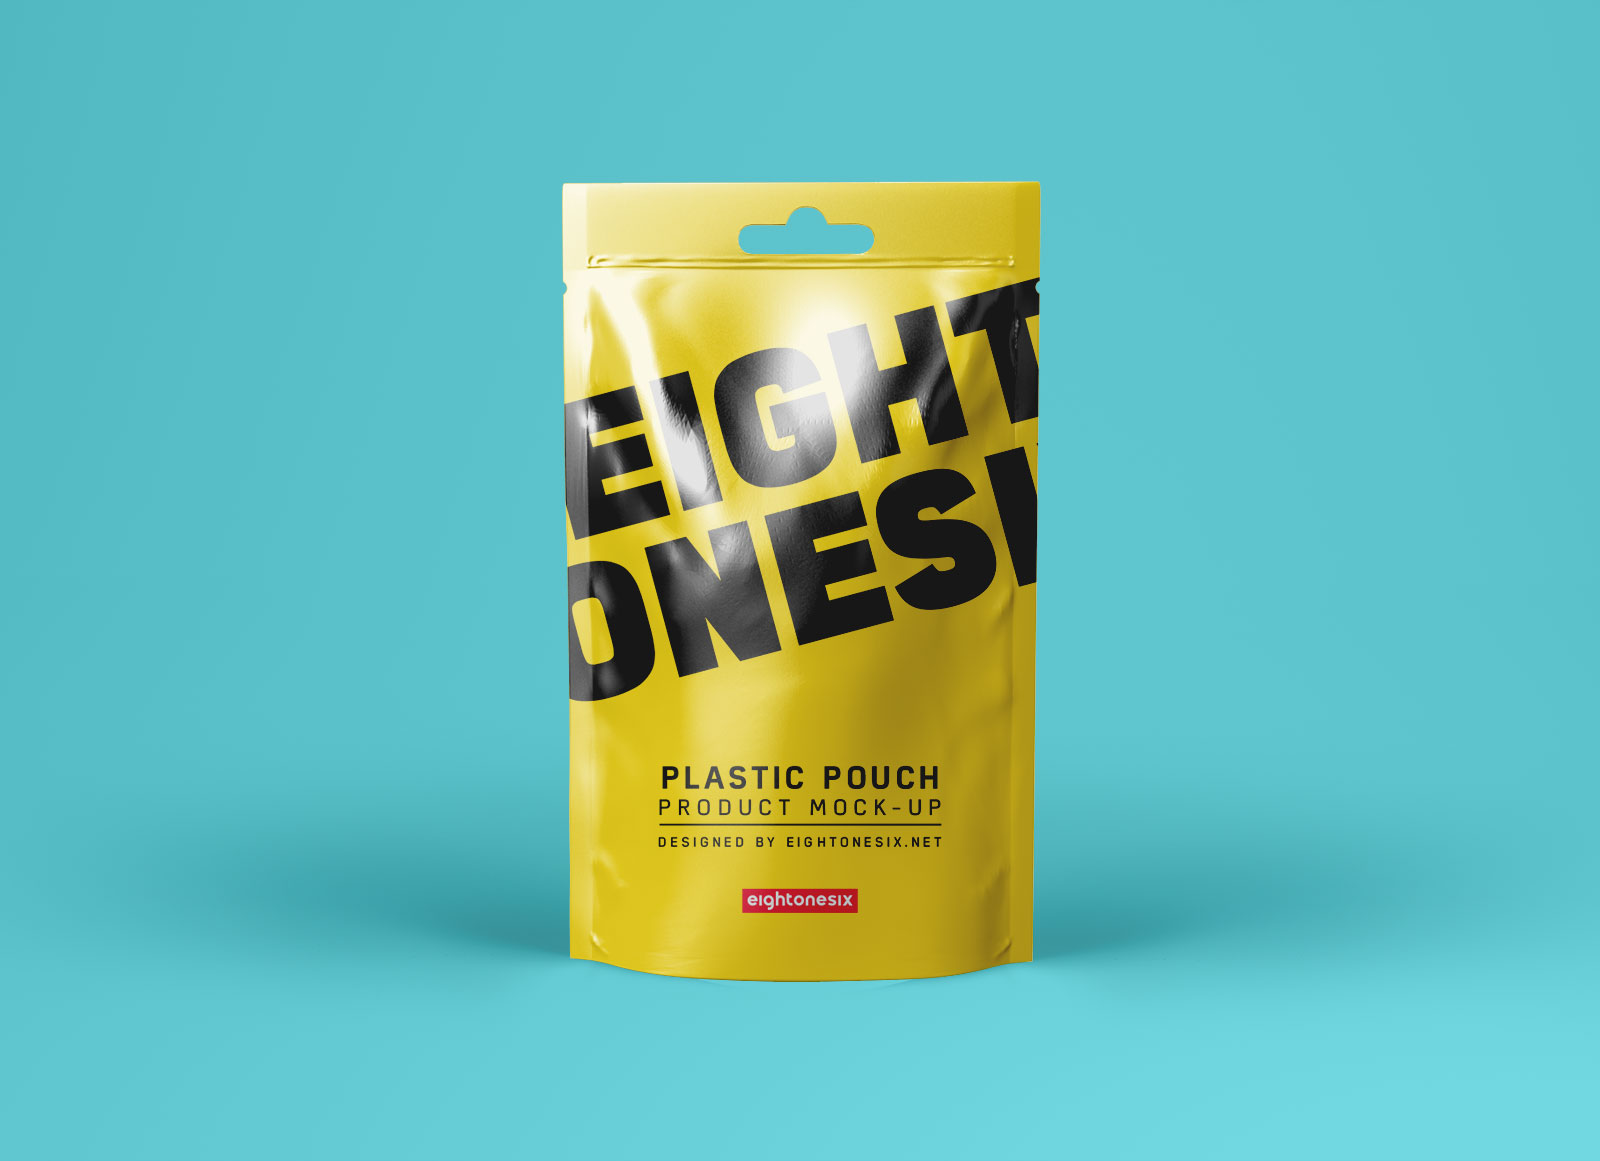 Realistic Standing Plastic Pouch Packaging Mockup